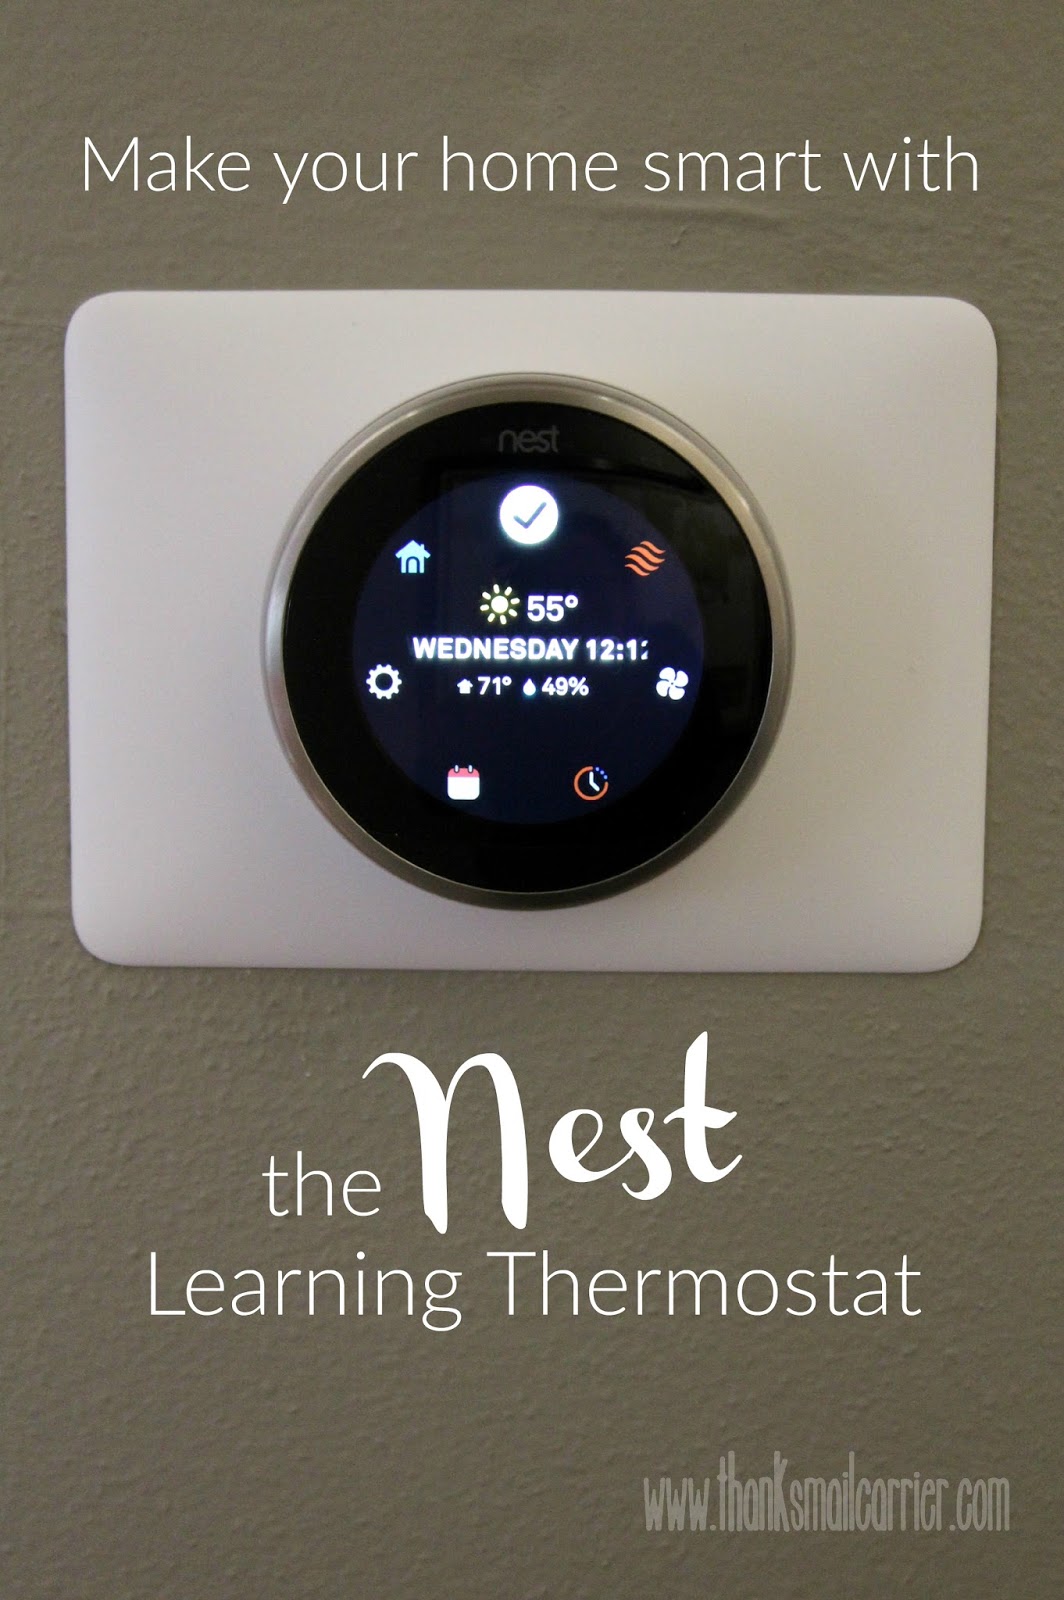 Nest Learning Thermostat reviews